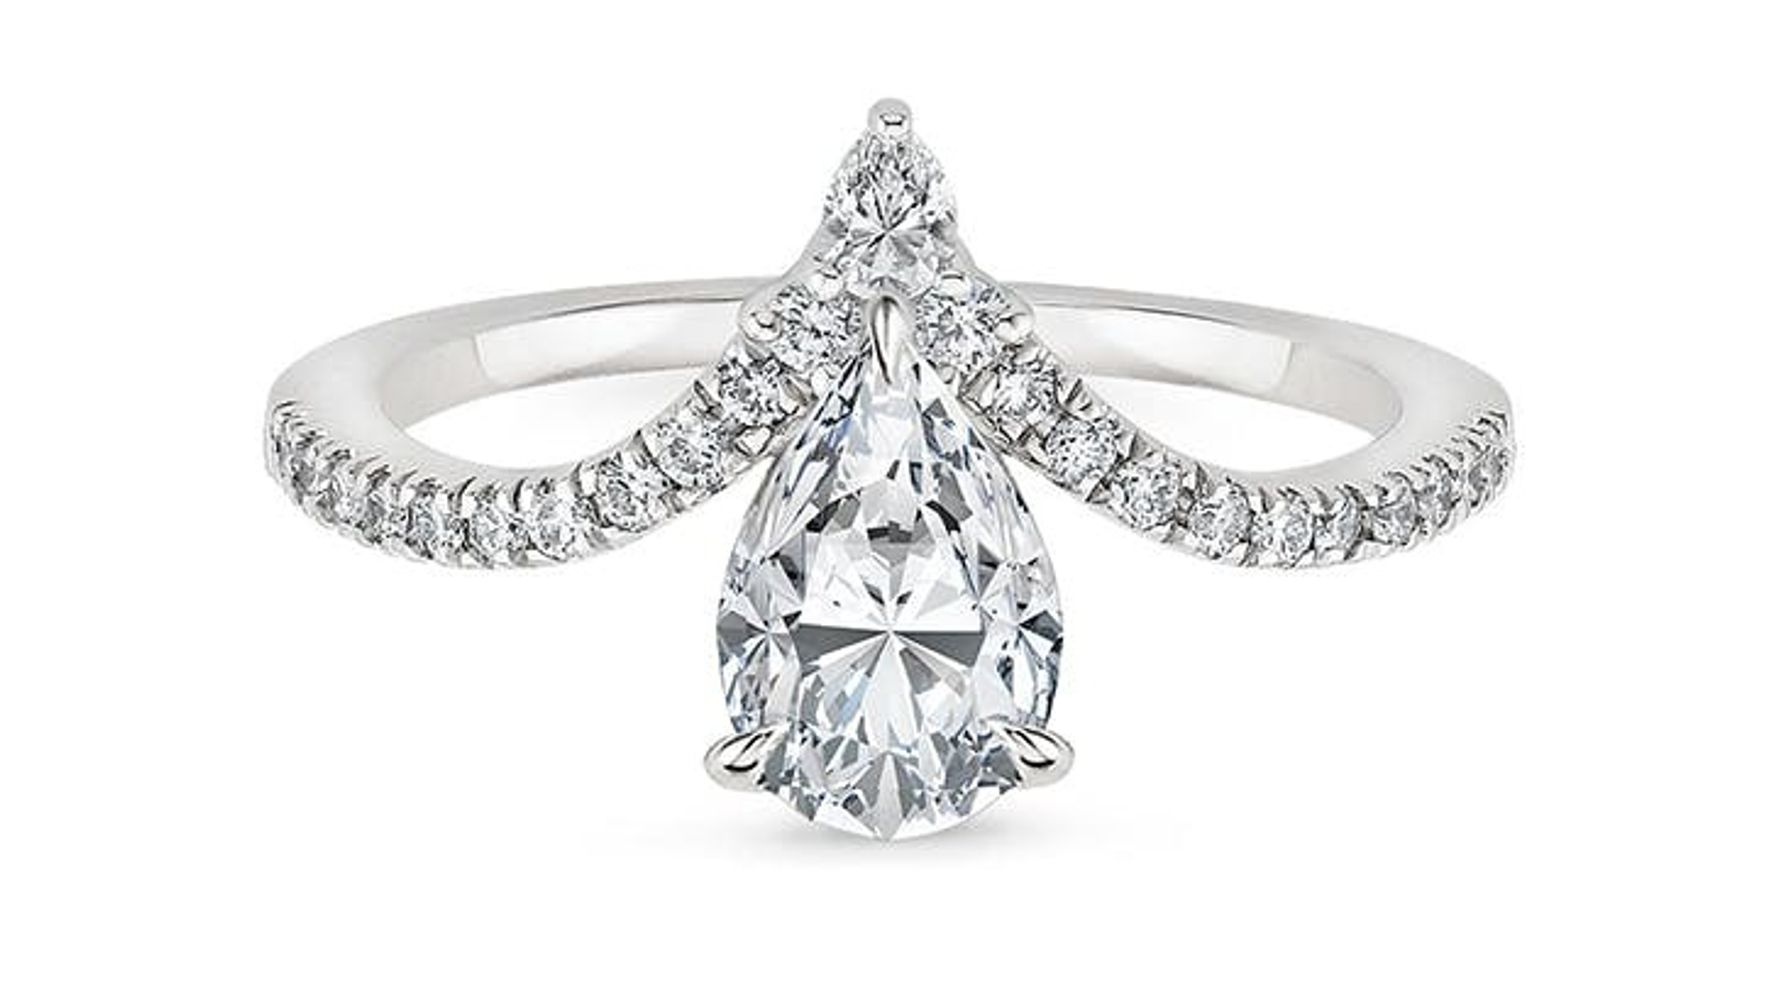 The 'Upside-Down' Engagement Ring Trend We Didn't See Coming